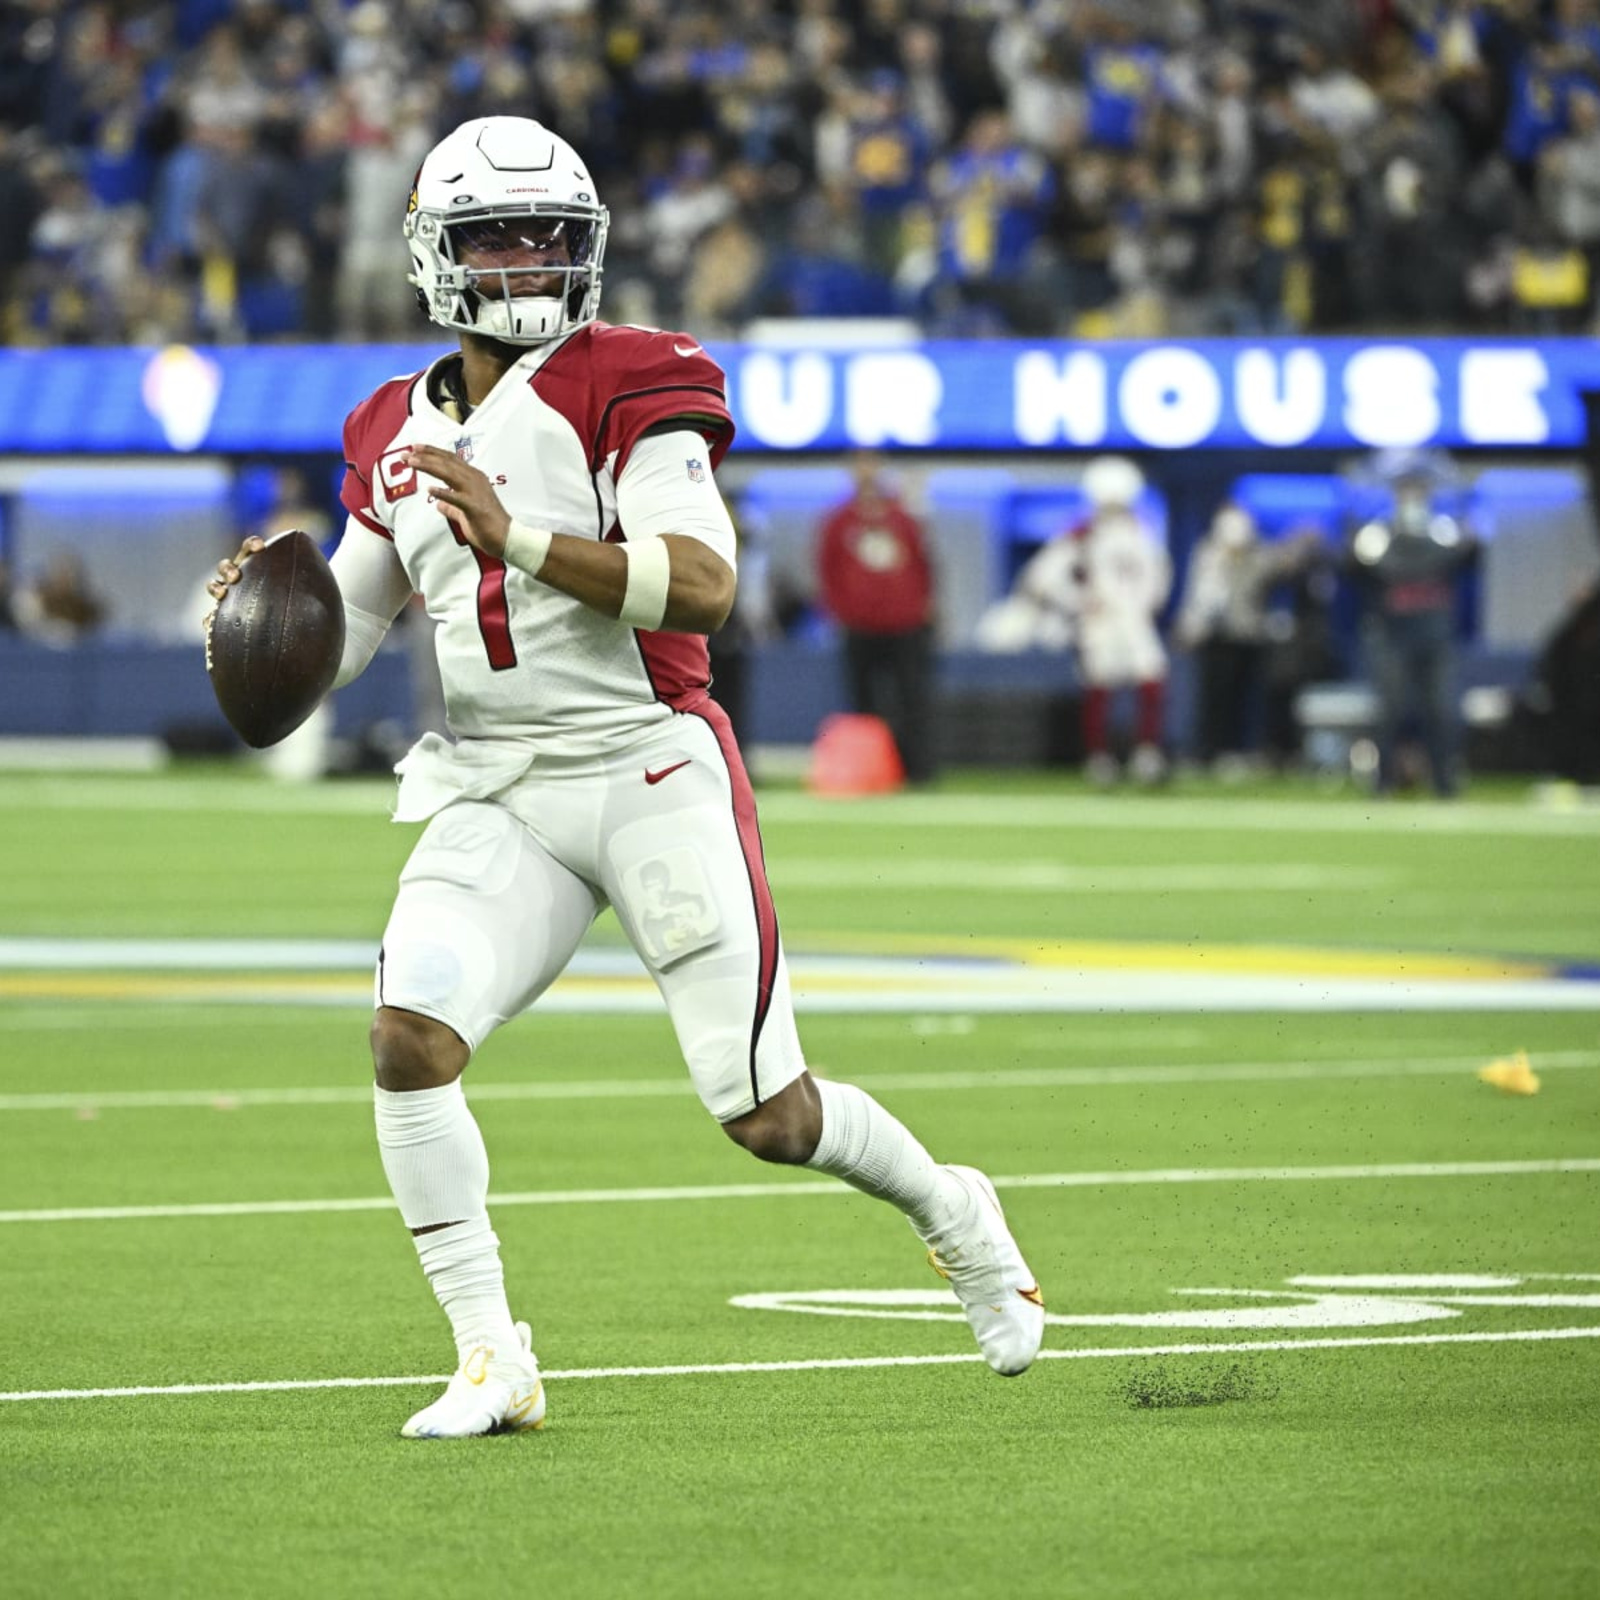 Once and for all, Kyler Murray explodes the myth of quarterbacks and height  - The Boston Globe